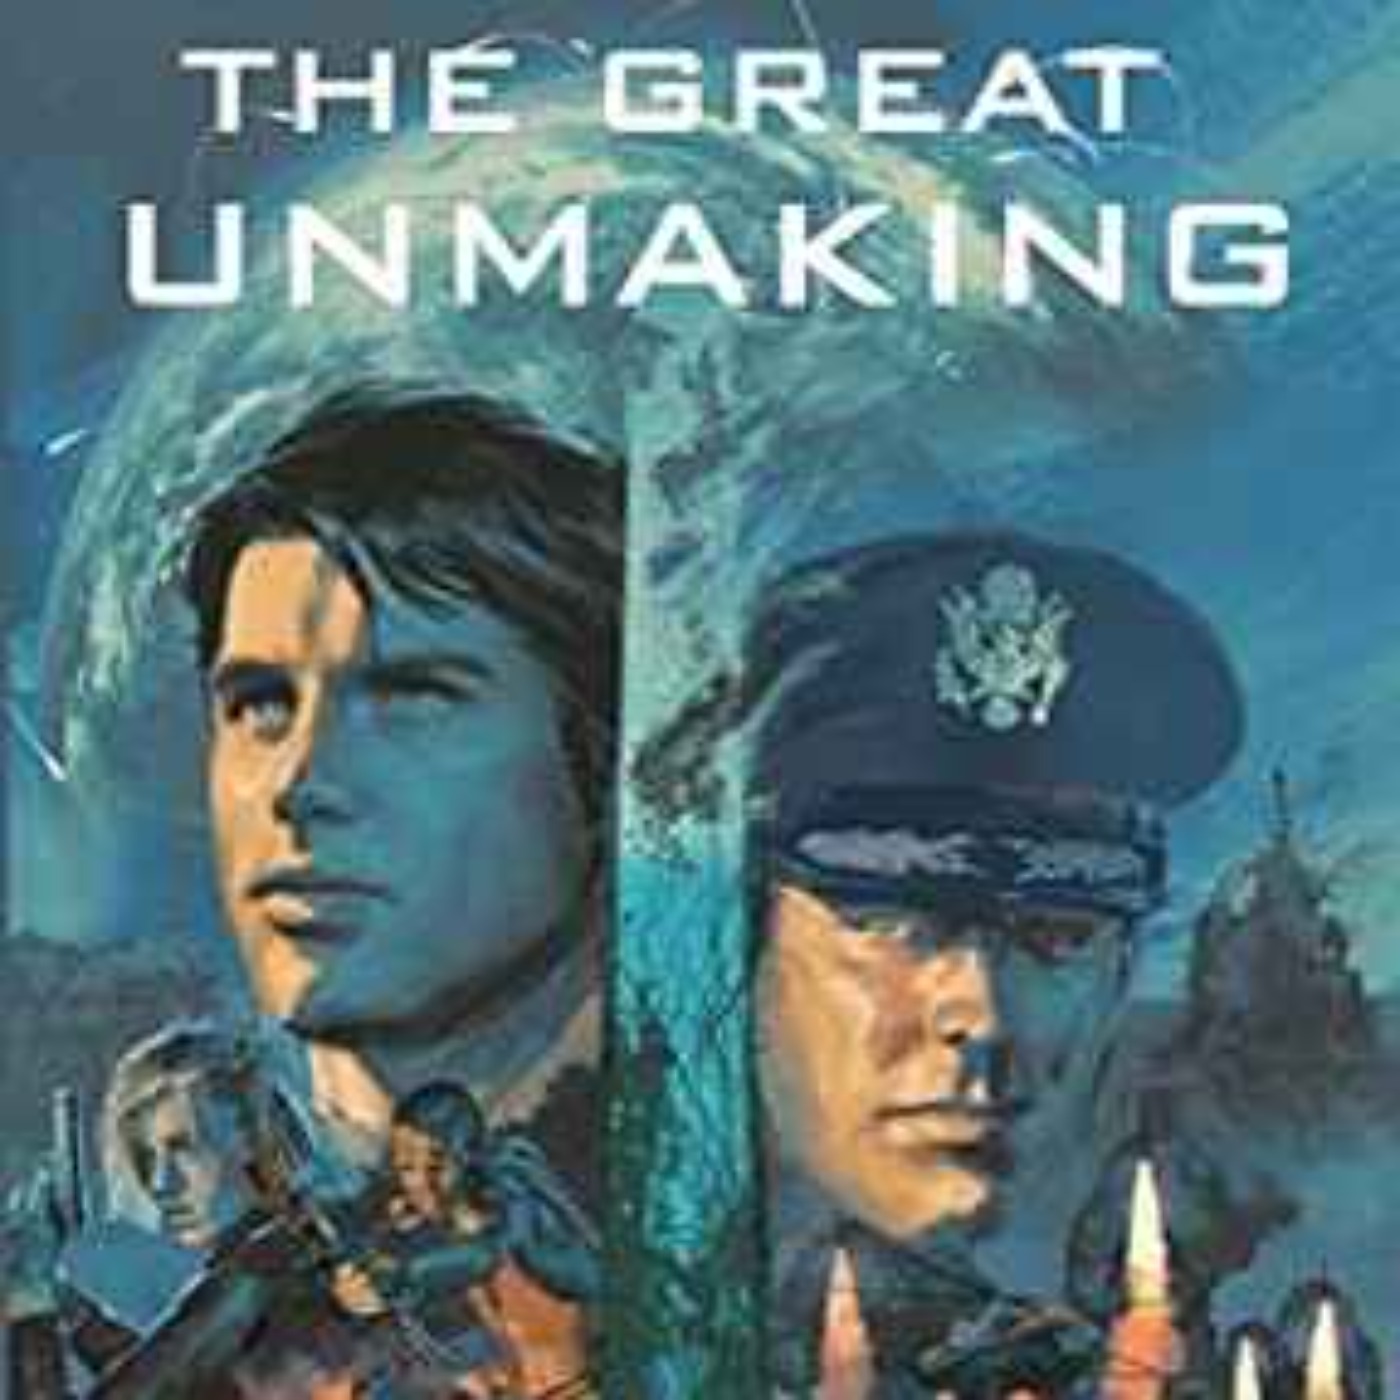 Brian A. Nelson - The Great Unmaking (The Course of Empire Series Book 3)